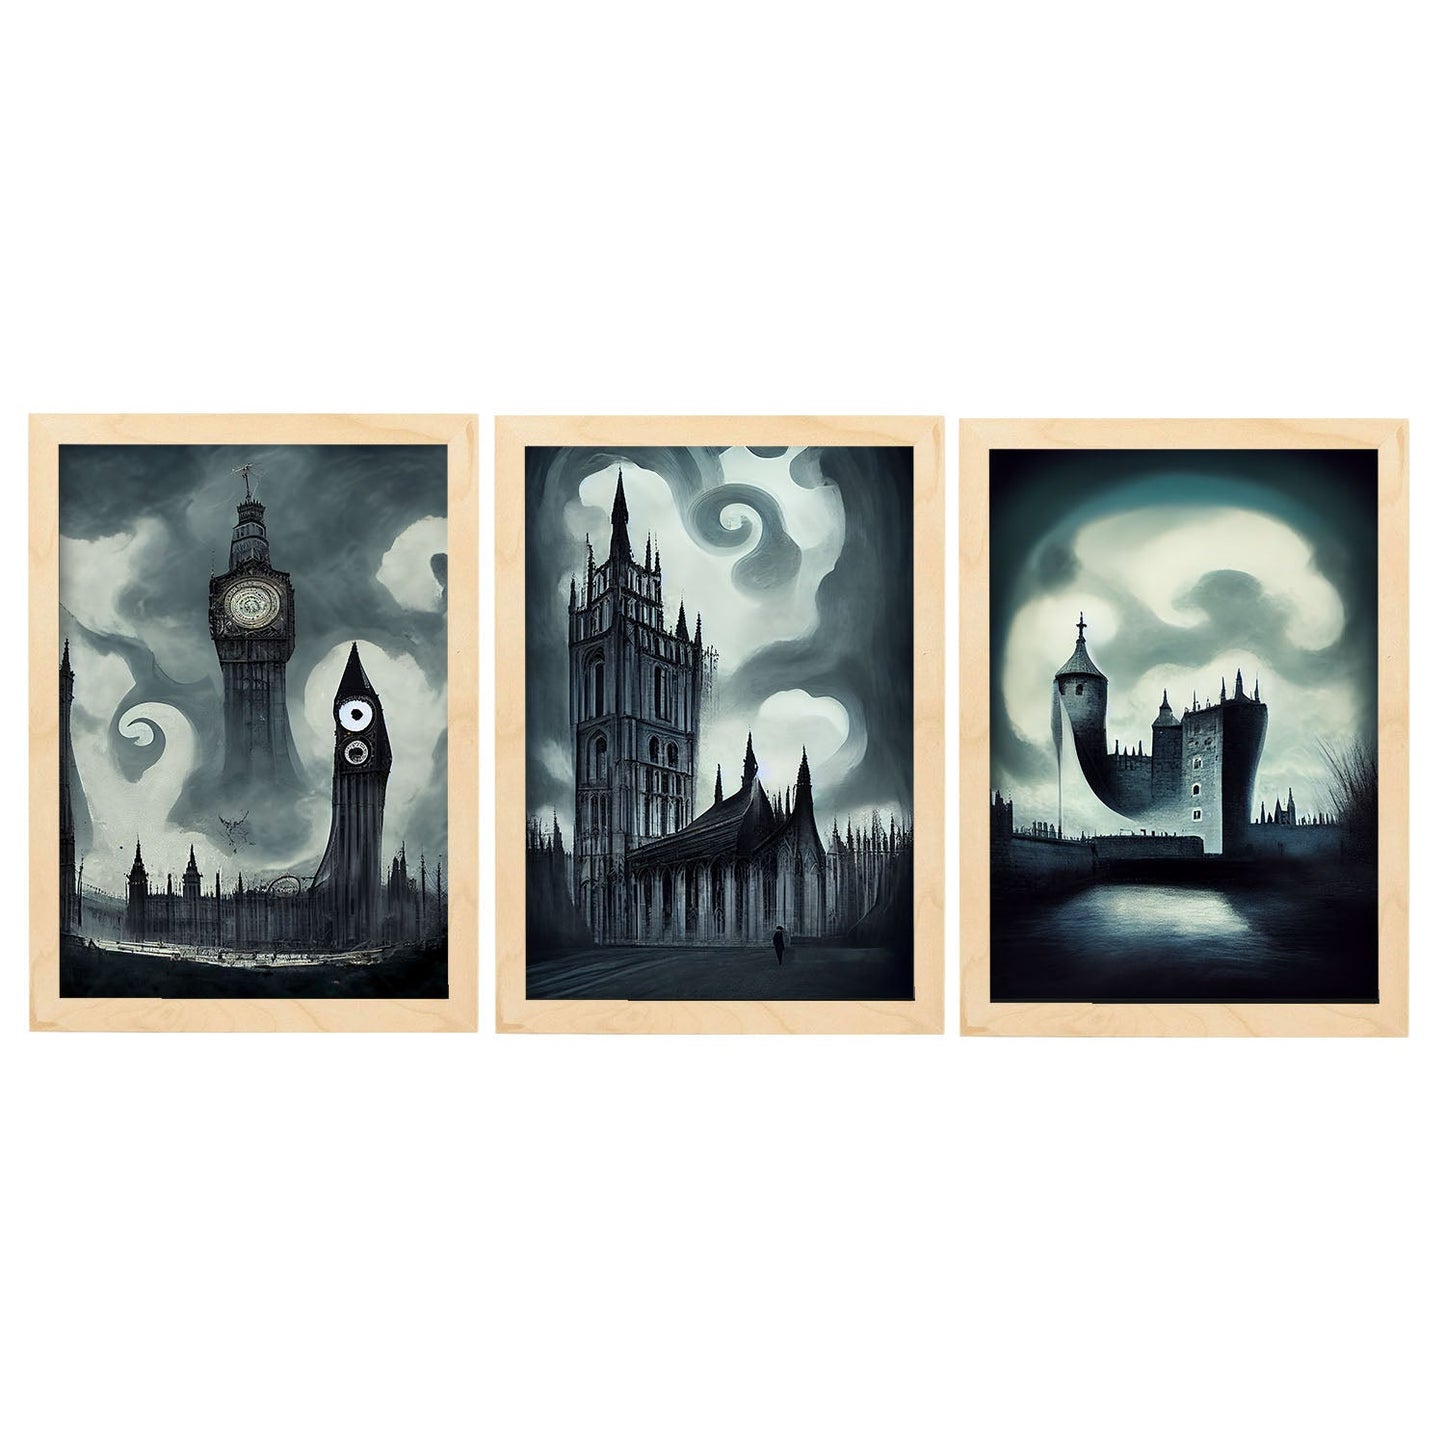 Burton style Illustrations of monuments and cities inspired by Burton's Dark and Goth art Interior Design and Decoration Set Collection 12-Artwork-Nacnic-A4-Marco Madera clara-Nacnic Estudio SL